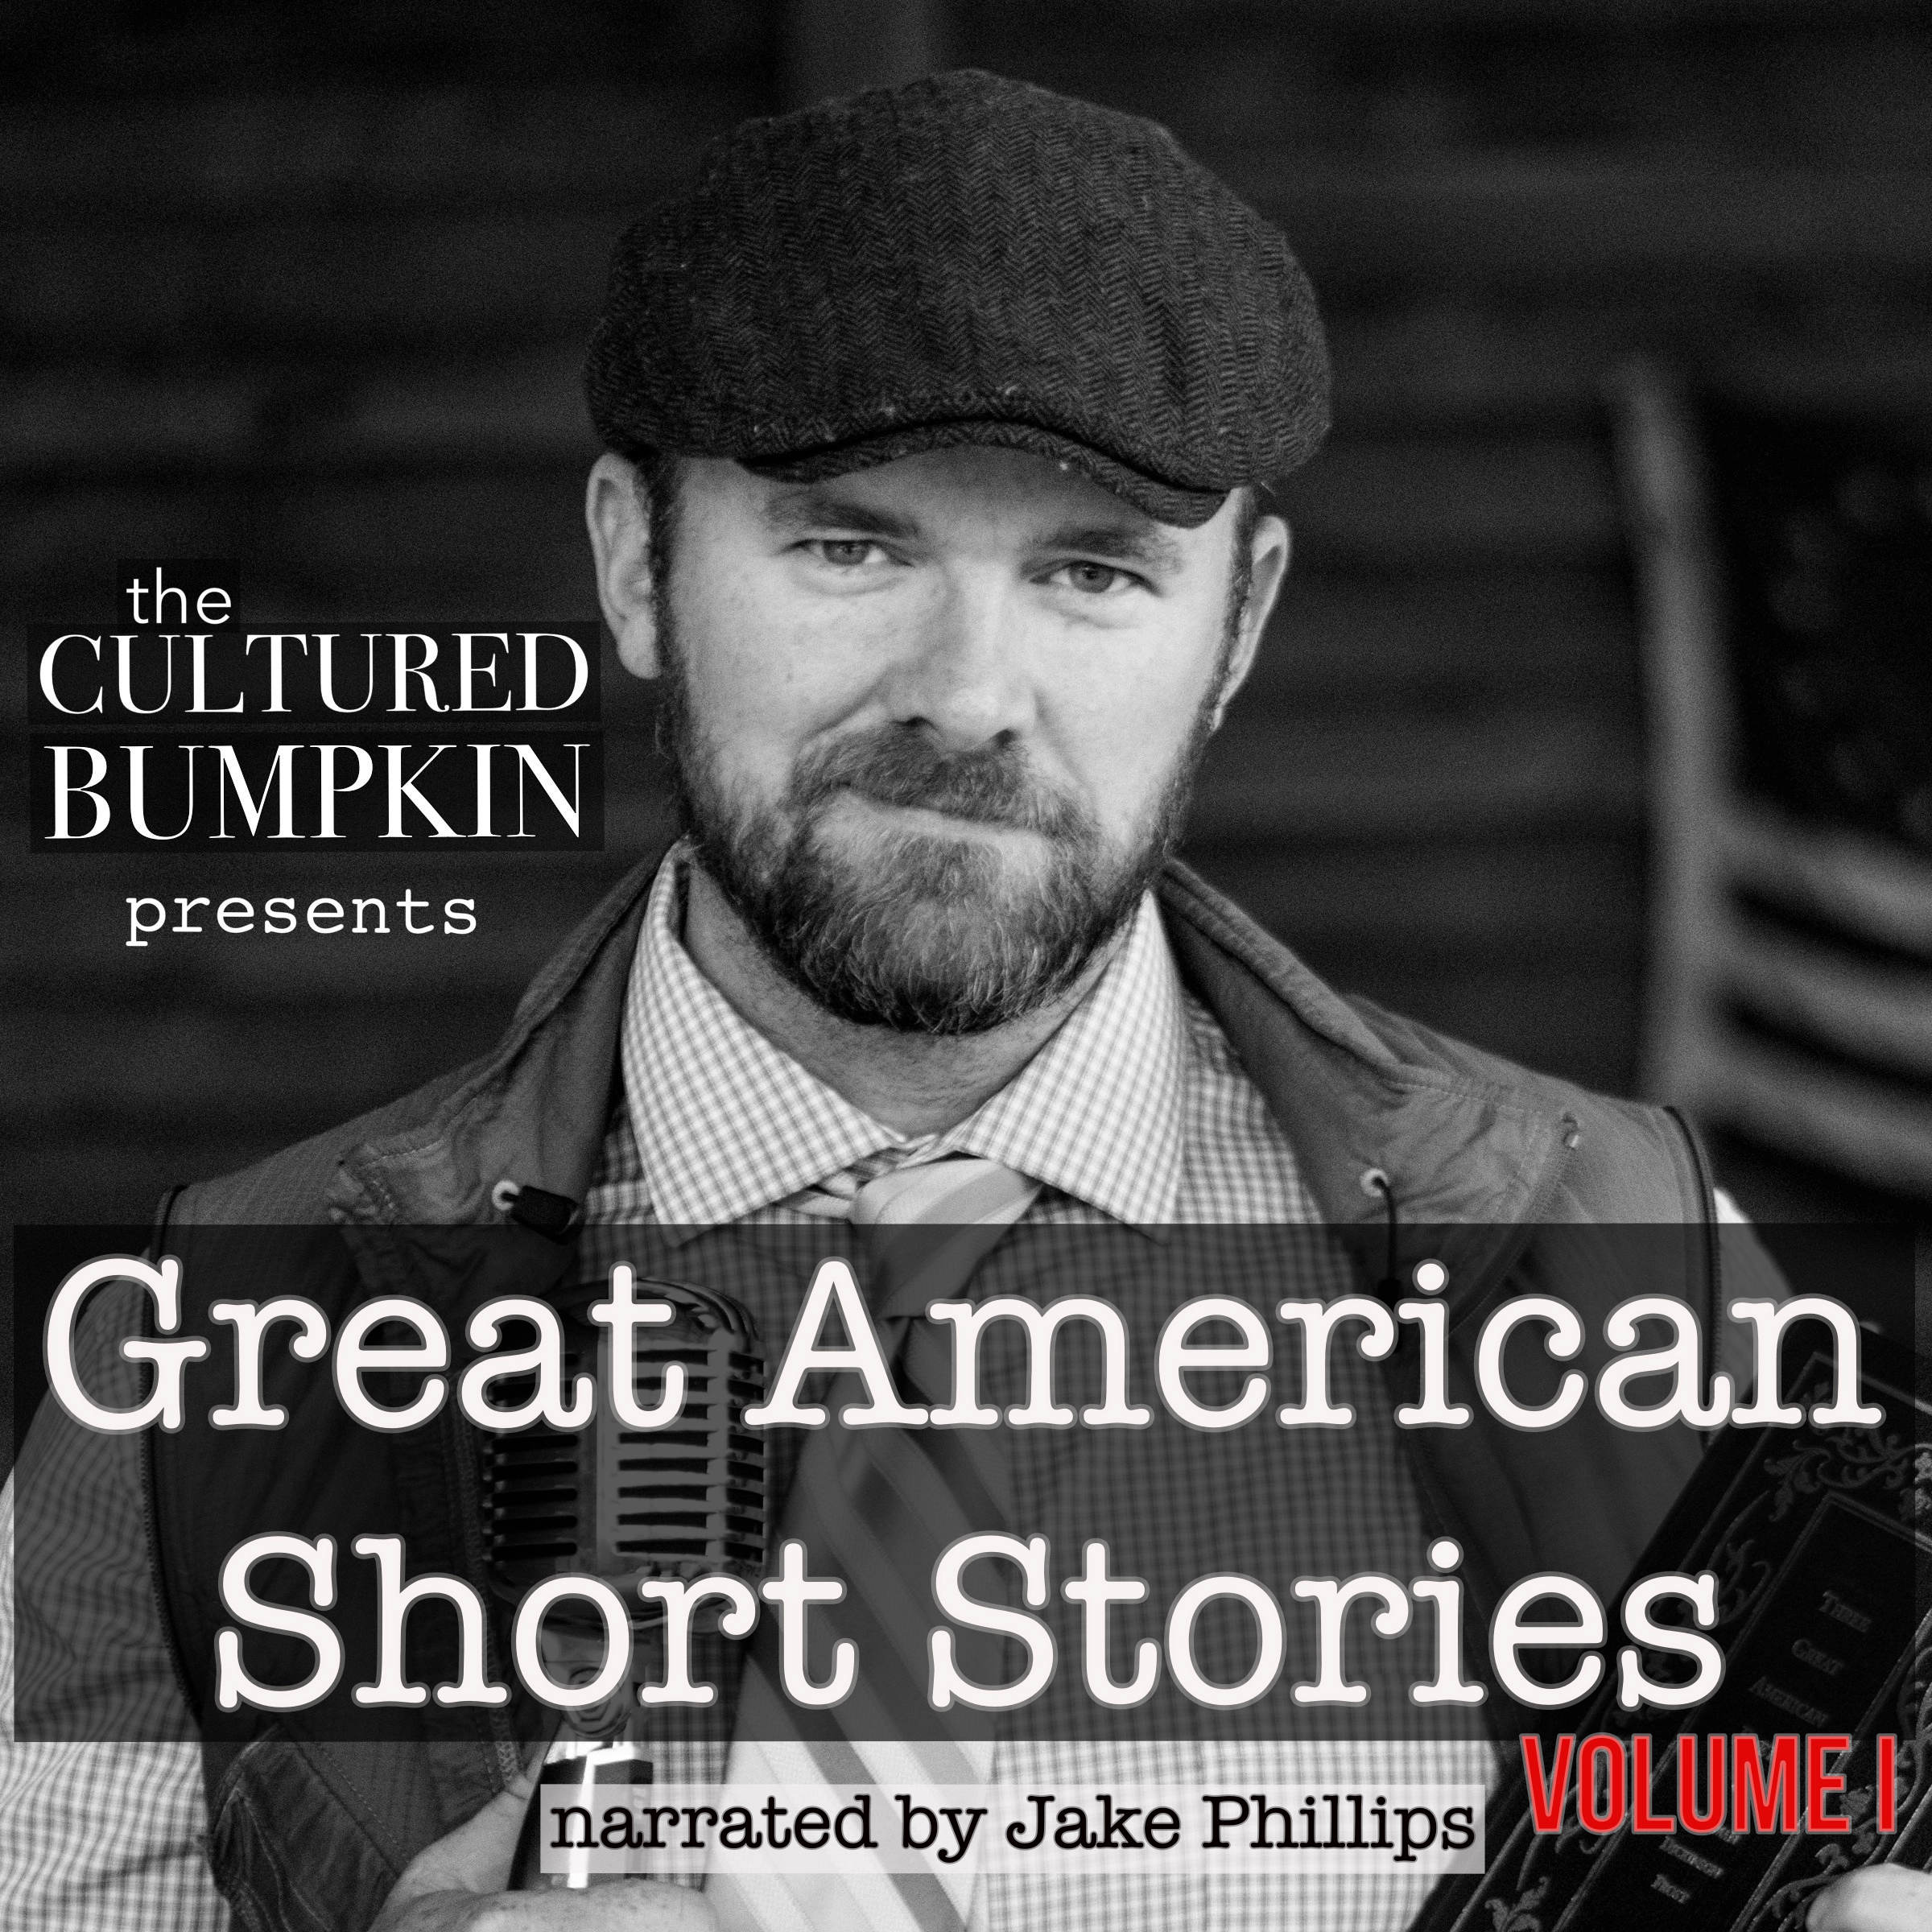 The Cultured Bumpkin Presents: Great American Short Stories Audiobook by Ambrose Bierce